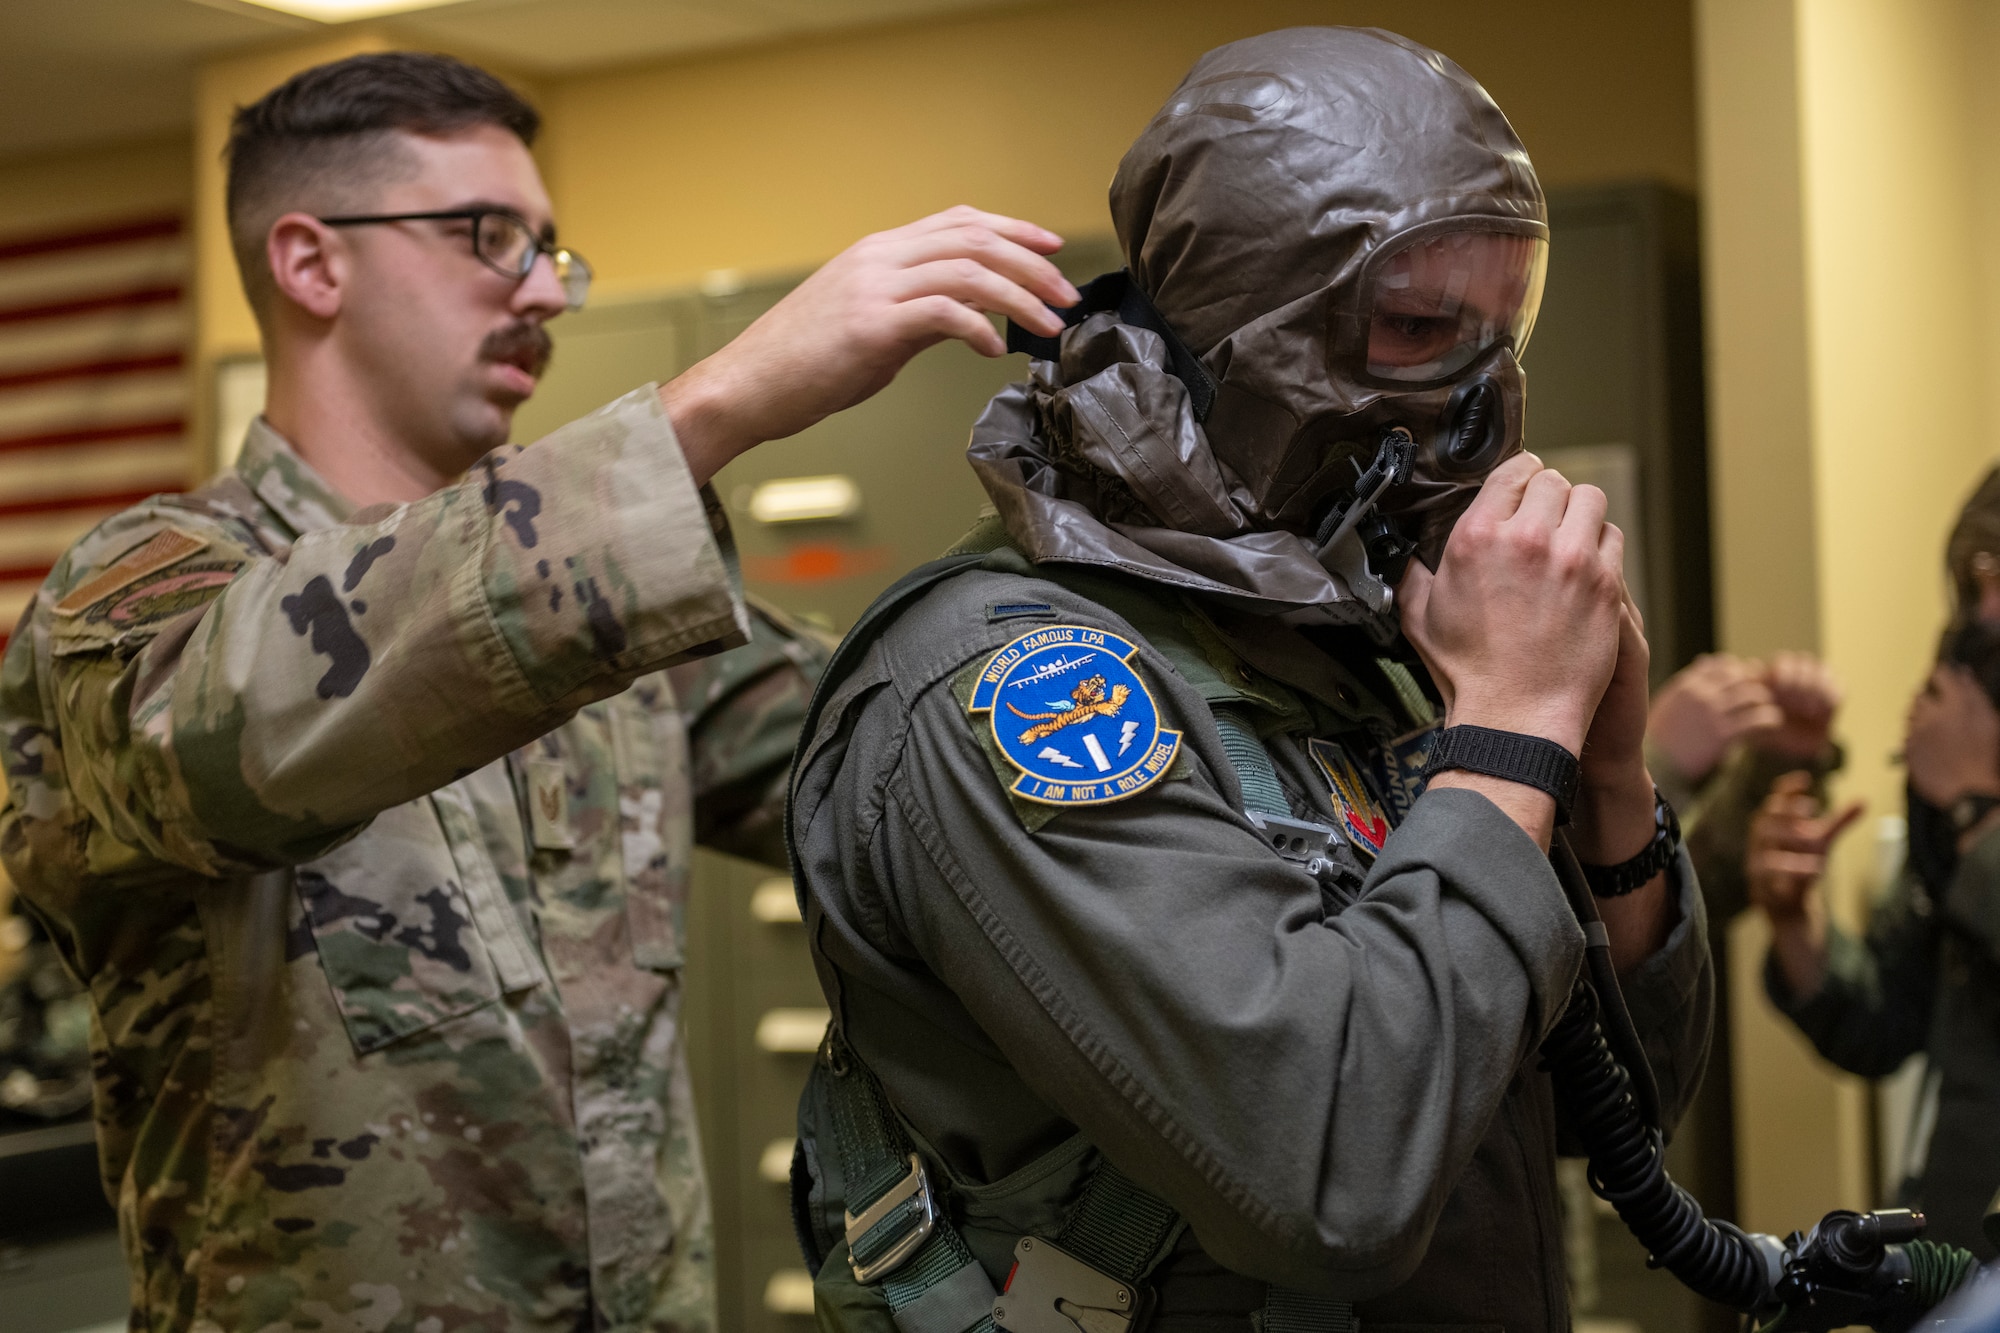 U.S. Air Force Tech. Sgt. Levi Schafer, 23rd Operation Support Squadron aircrew flight equipment inspection shop noncommissioned officer in charge, assists 1st Lt. James McMahon, 74th Fighter Squadron A-10C Thunderbolt II pilot, with his mask portion of an Aircrew Eye Respiratory Protection system at Moody Air Force Base, Georgia, Jan. 5, 2023.